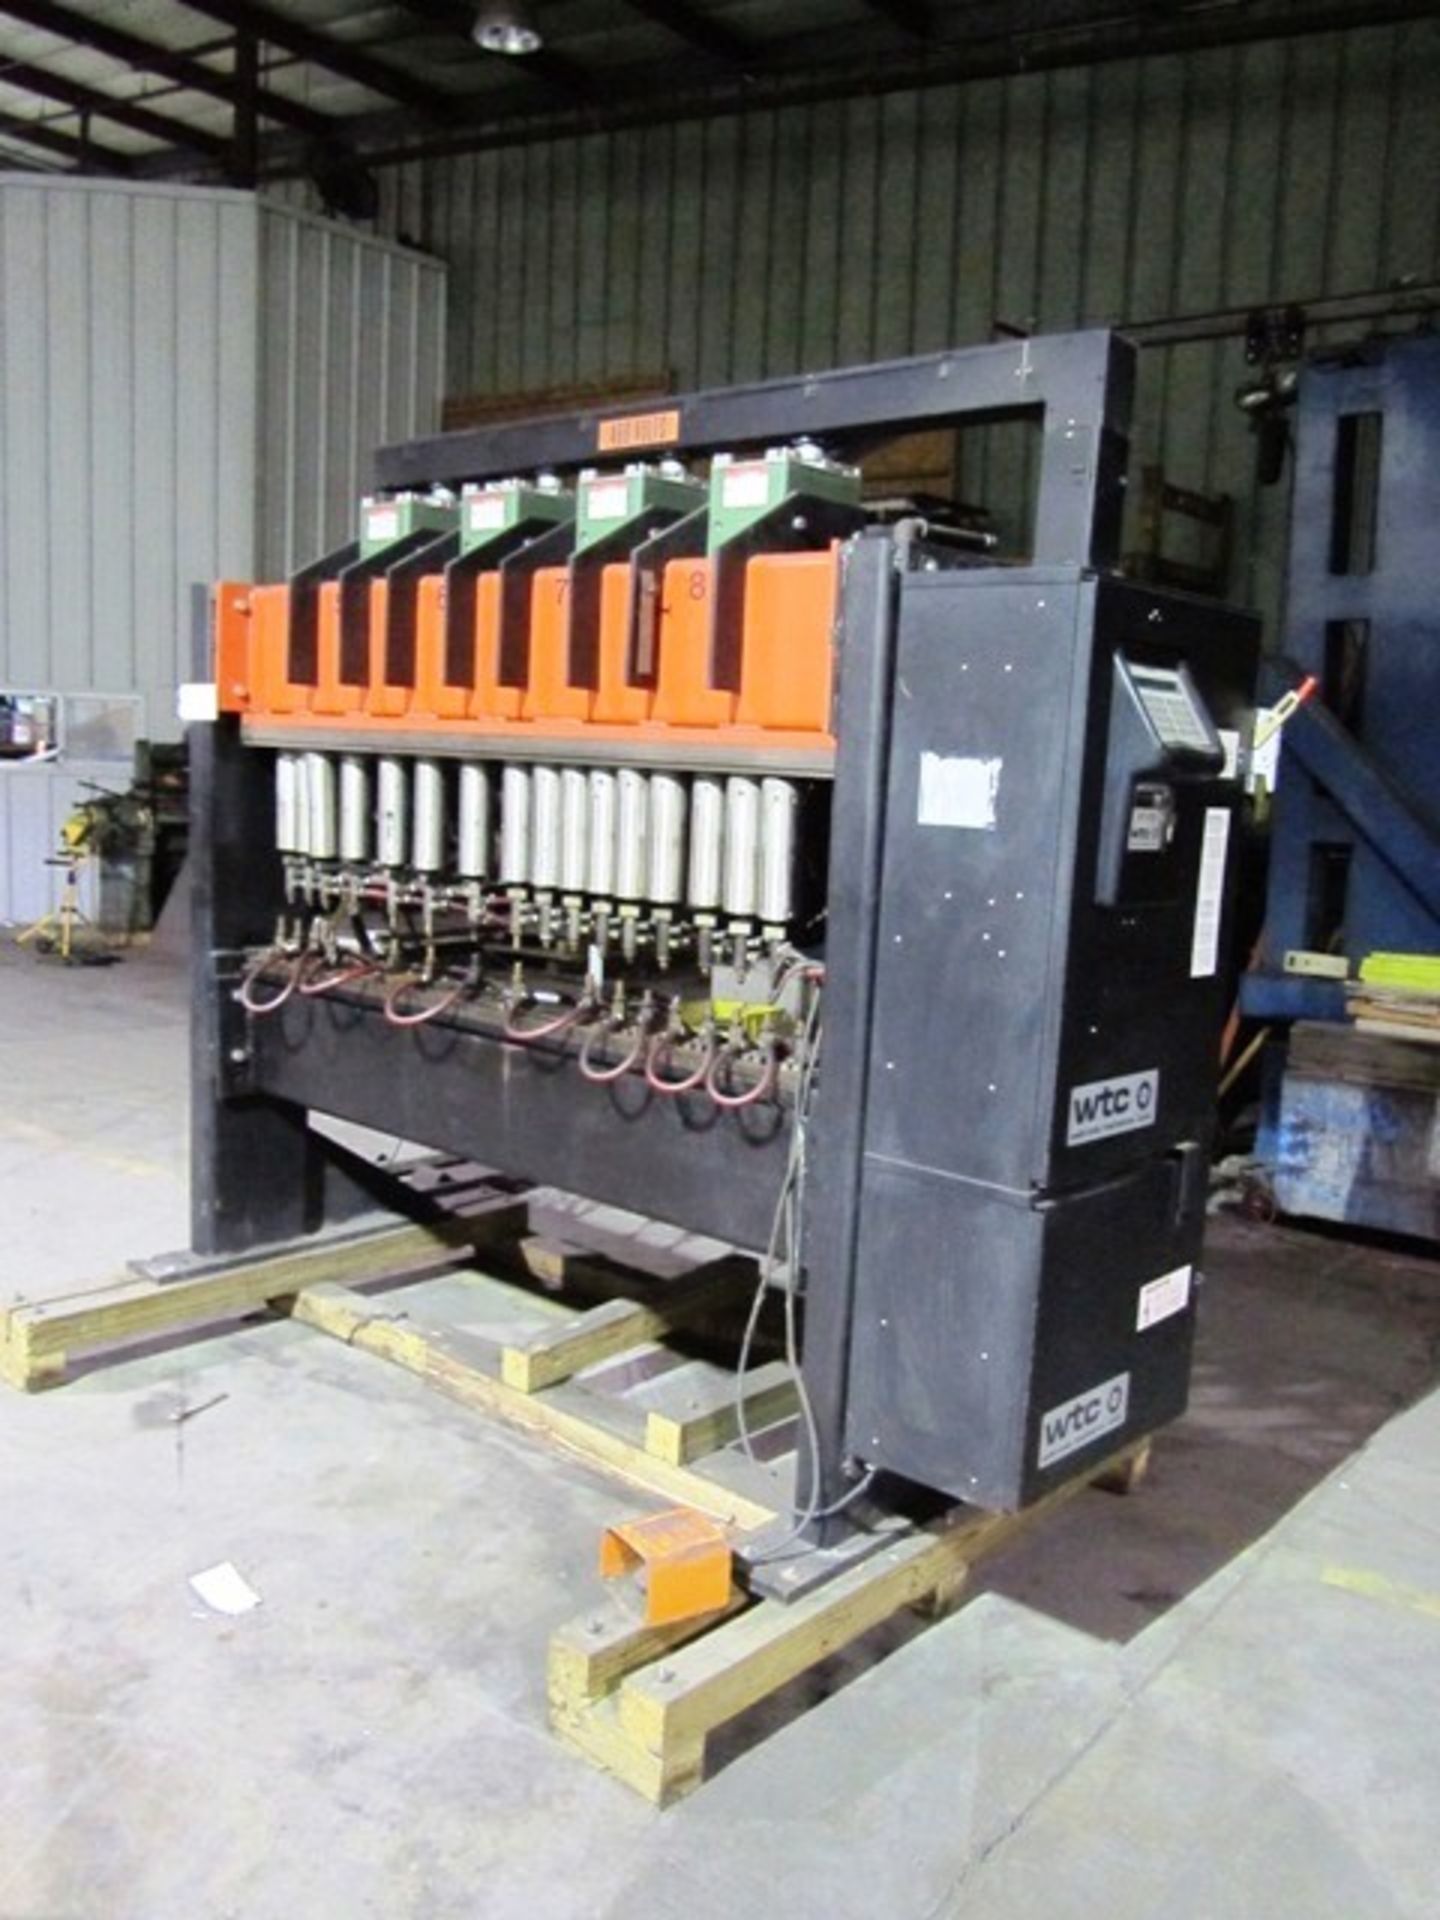 Hoffman Chicago 16 Position Spot Welder with 85KVA, Remote Foot Pedal & Weldtronic WTC WT-900 PLC